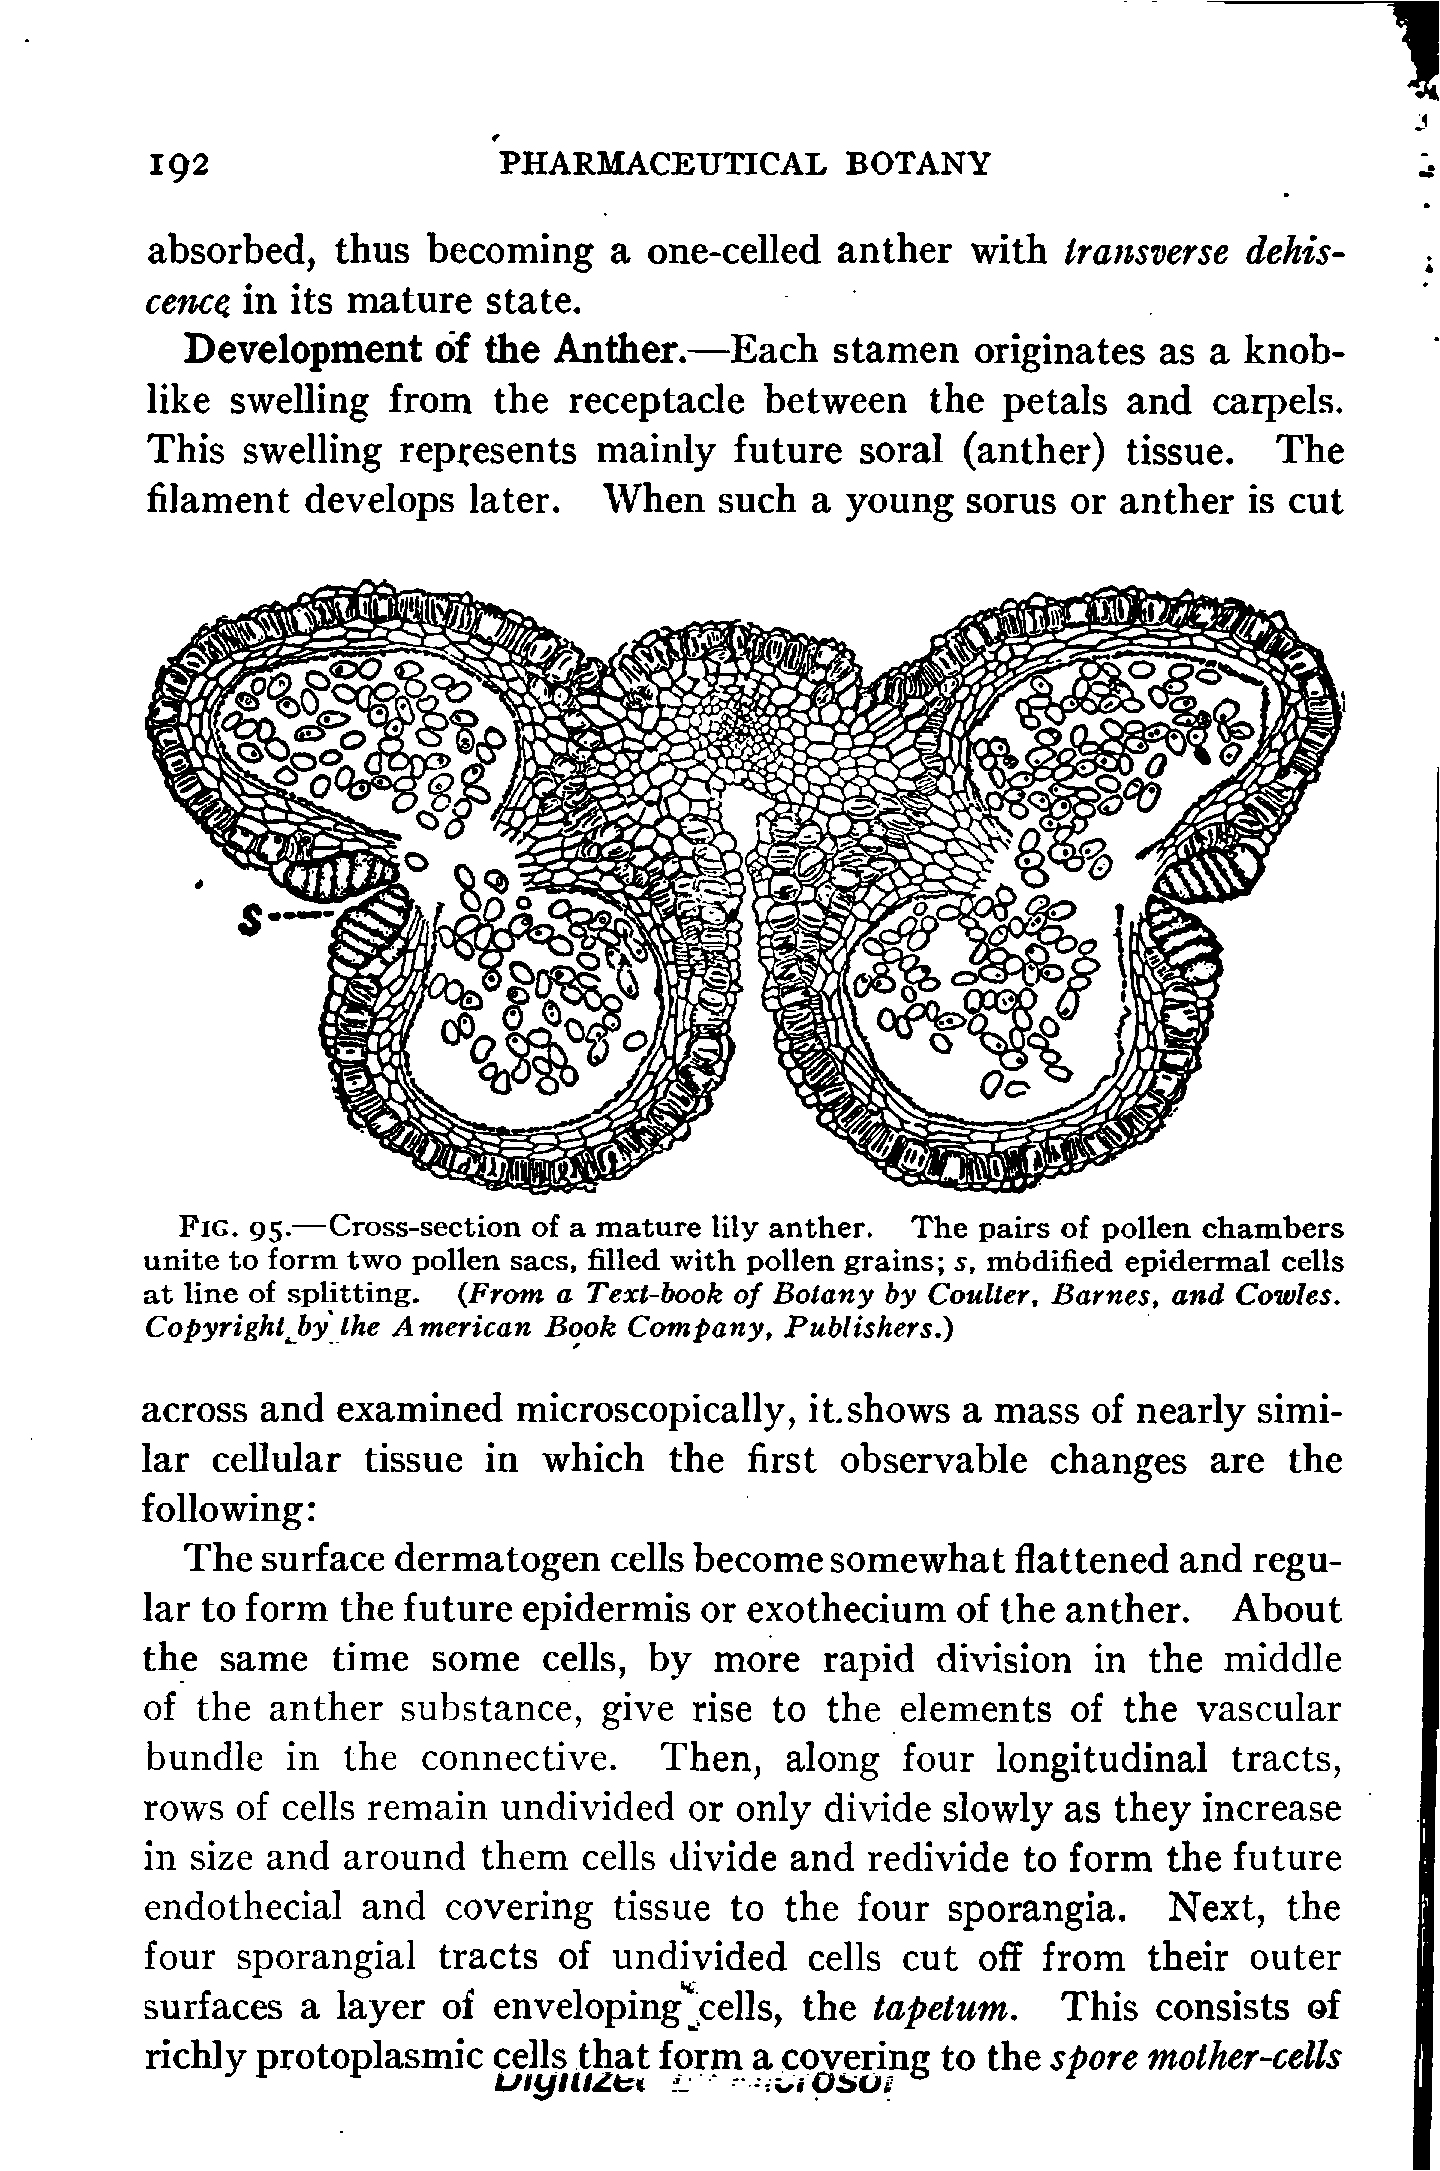 Fig. 95.—Cross-section of a mature Uly anther. The pairs of pollen chambers unite to form two pollen sacs, filled with pollen grains s, mbdified epidermal cells at line of splitting. From a Text-book of Botany by Coulter, Barnes, and Cowles. CopyrightJby the American Book Company, Publishers.)...